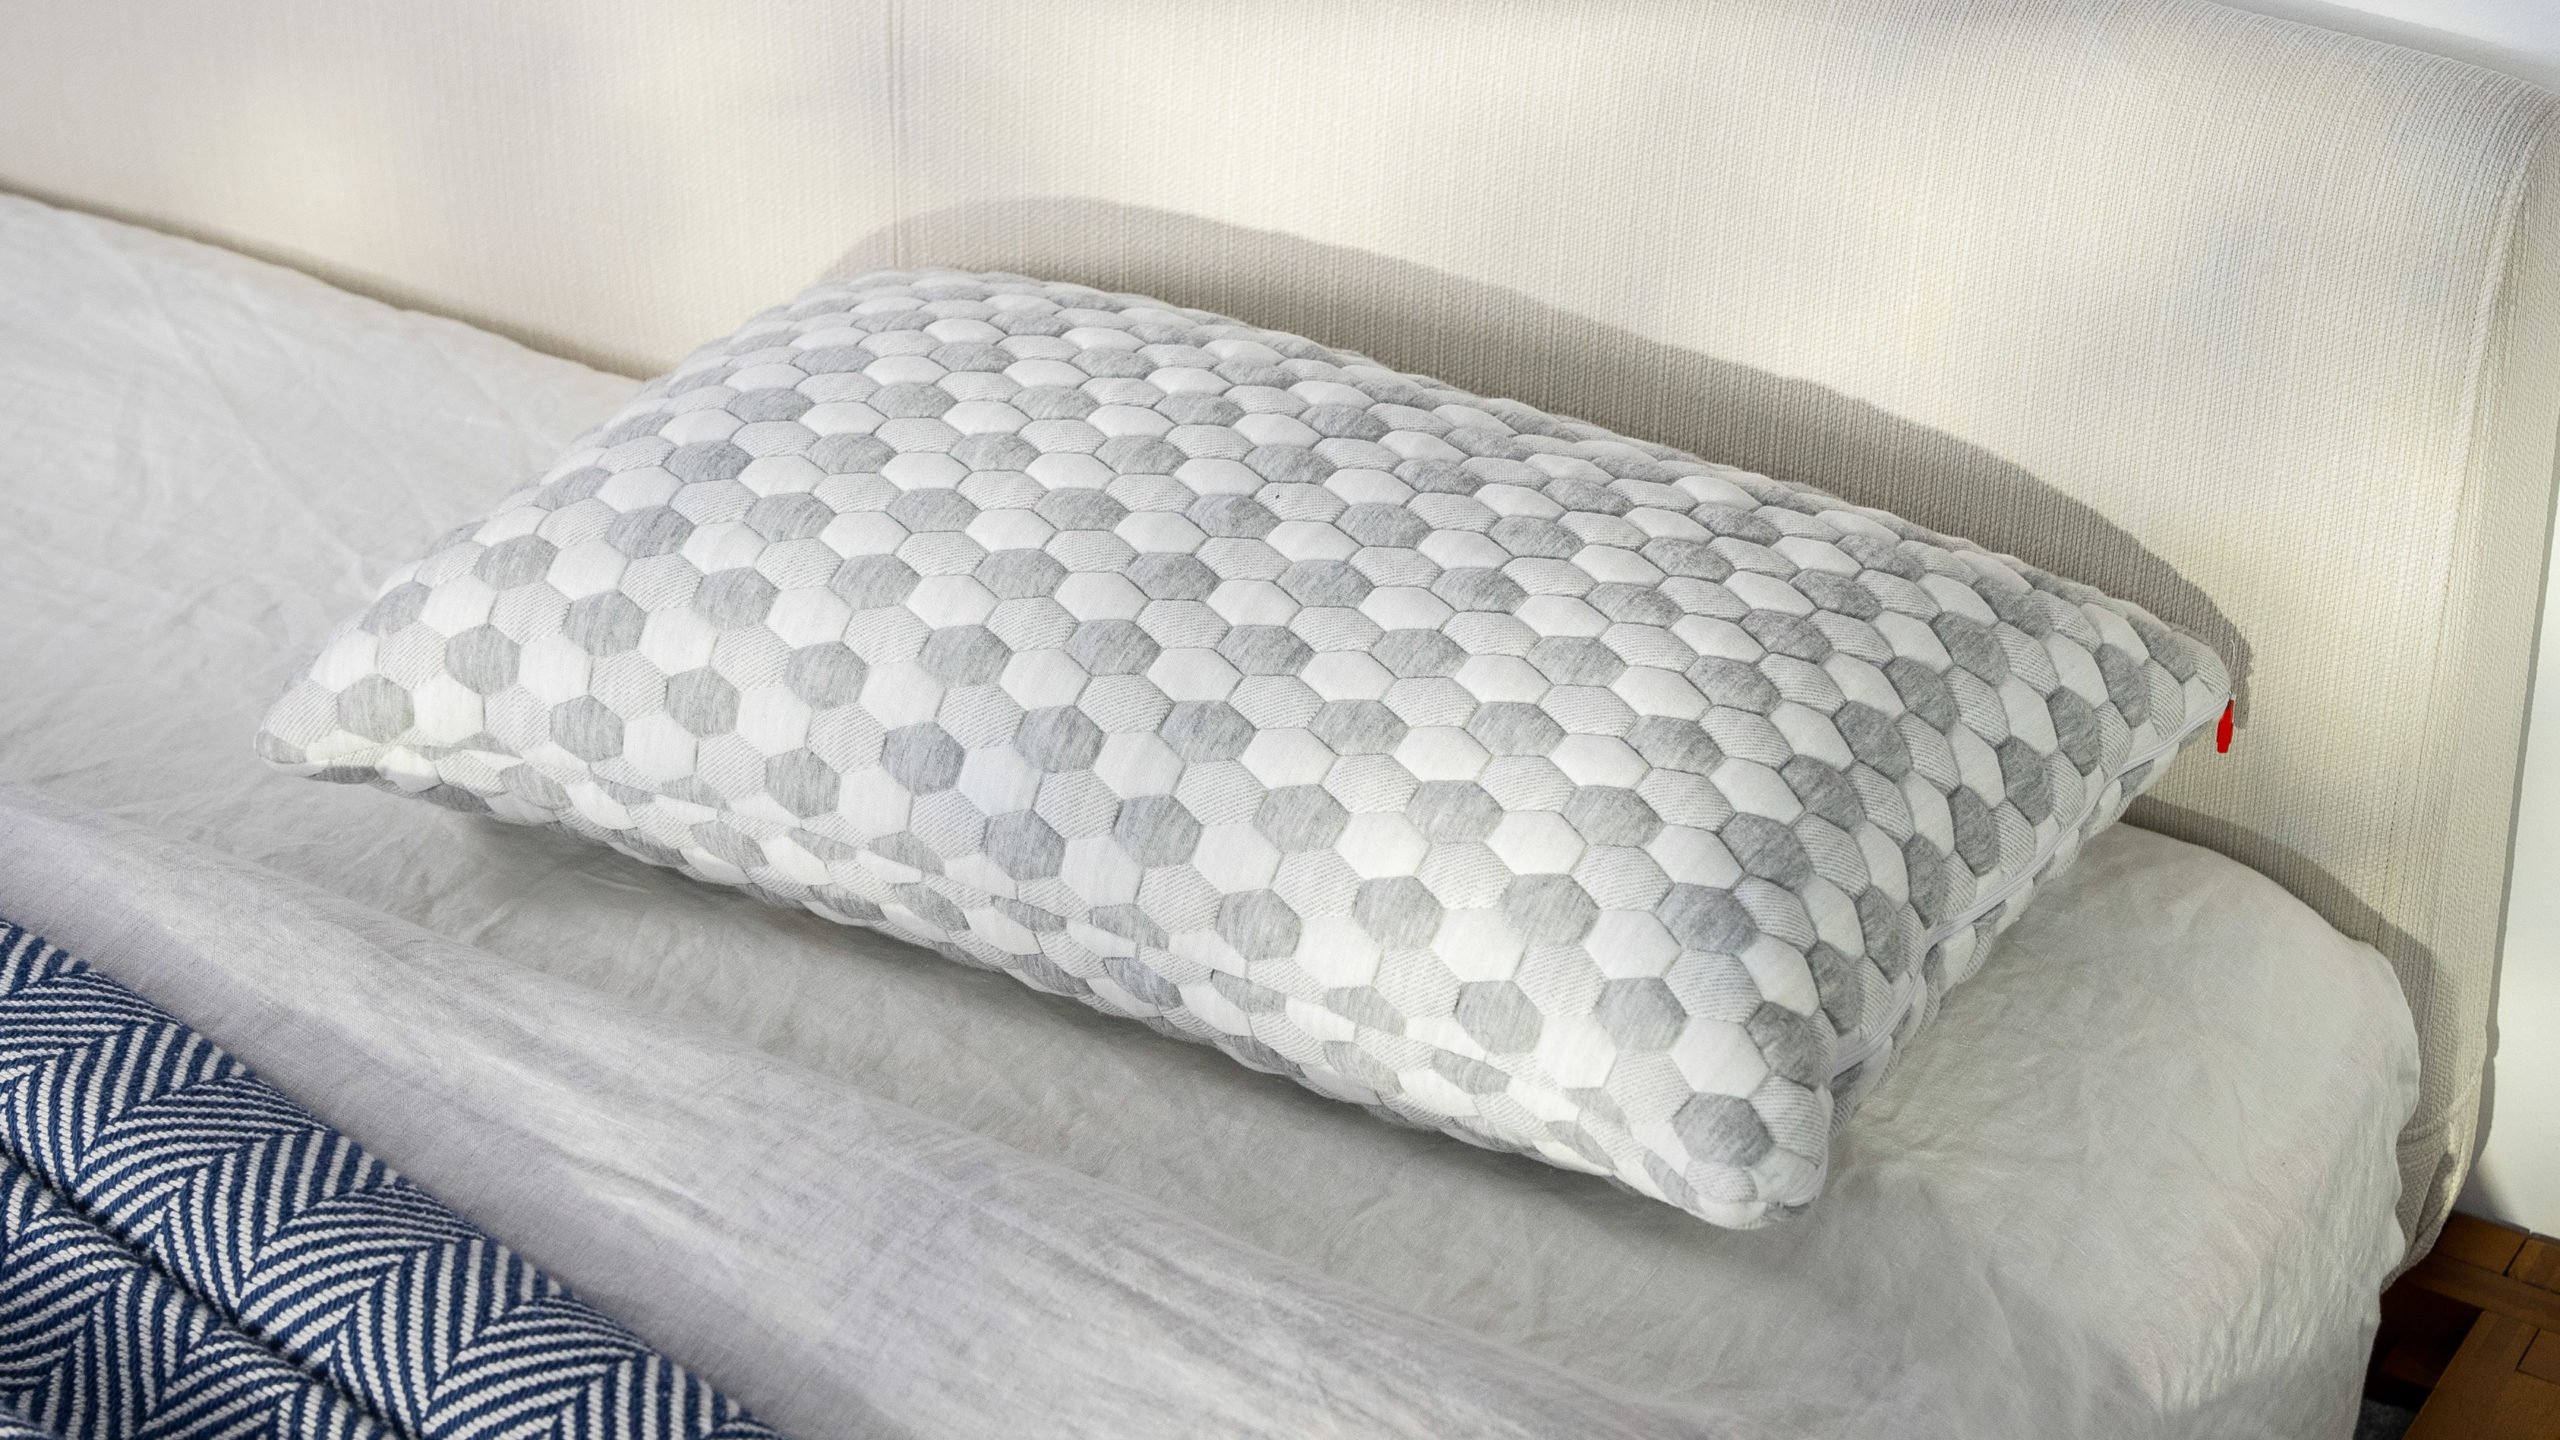  Layla Adjustable Fill Kapok Pillow, Luxury Cooling Pillow, King  Size : Home & Kitchen